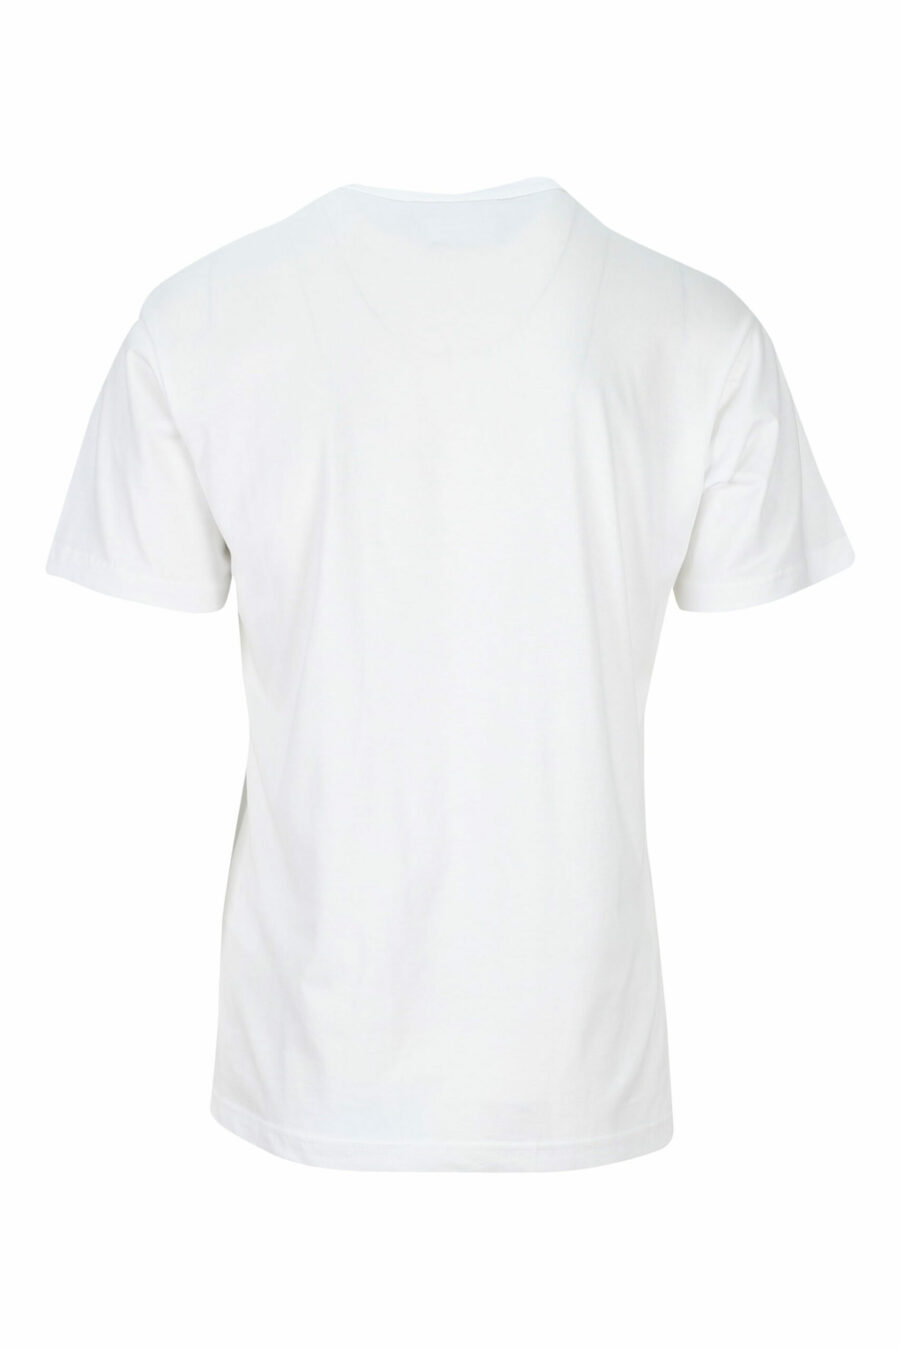 White T-shirt with black "piece number" maxilogo - 8052019468663 1 scaled